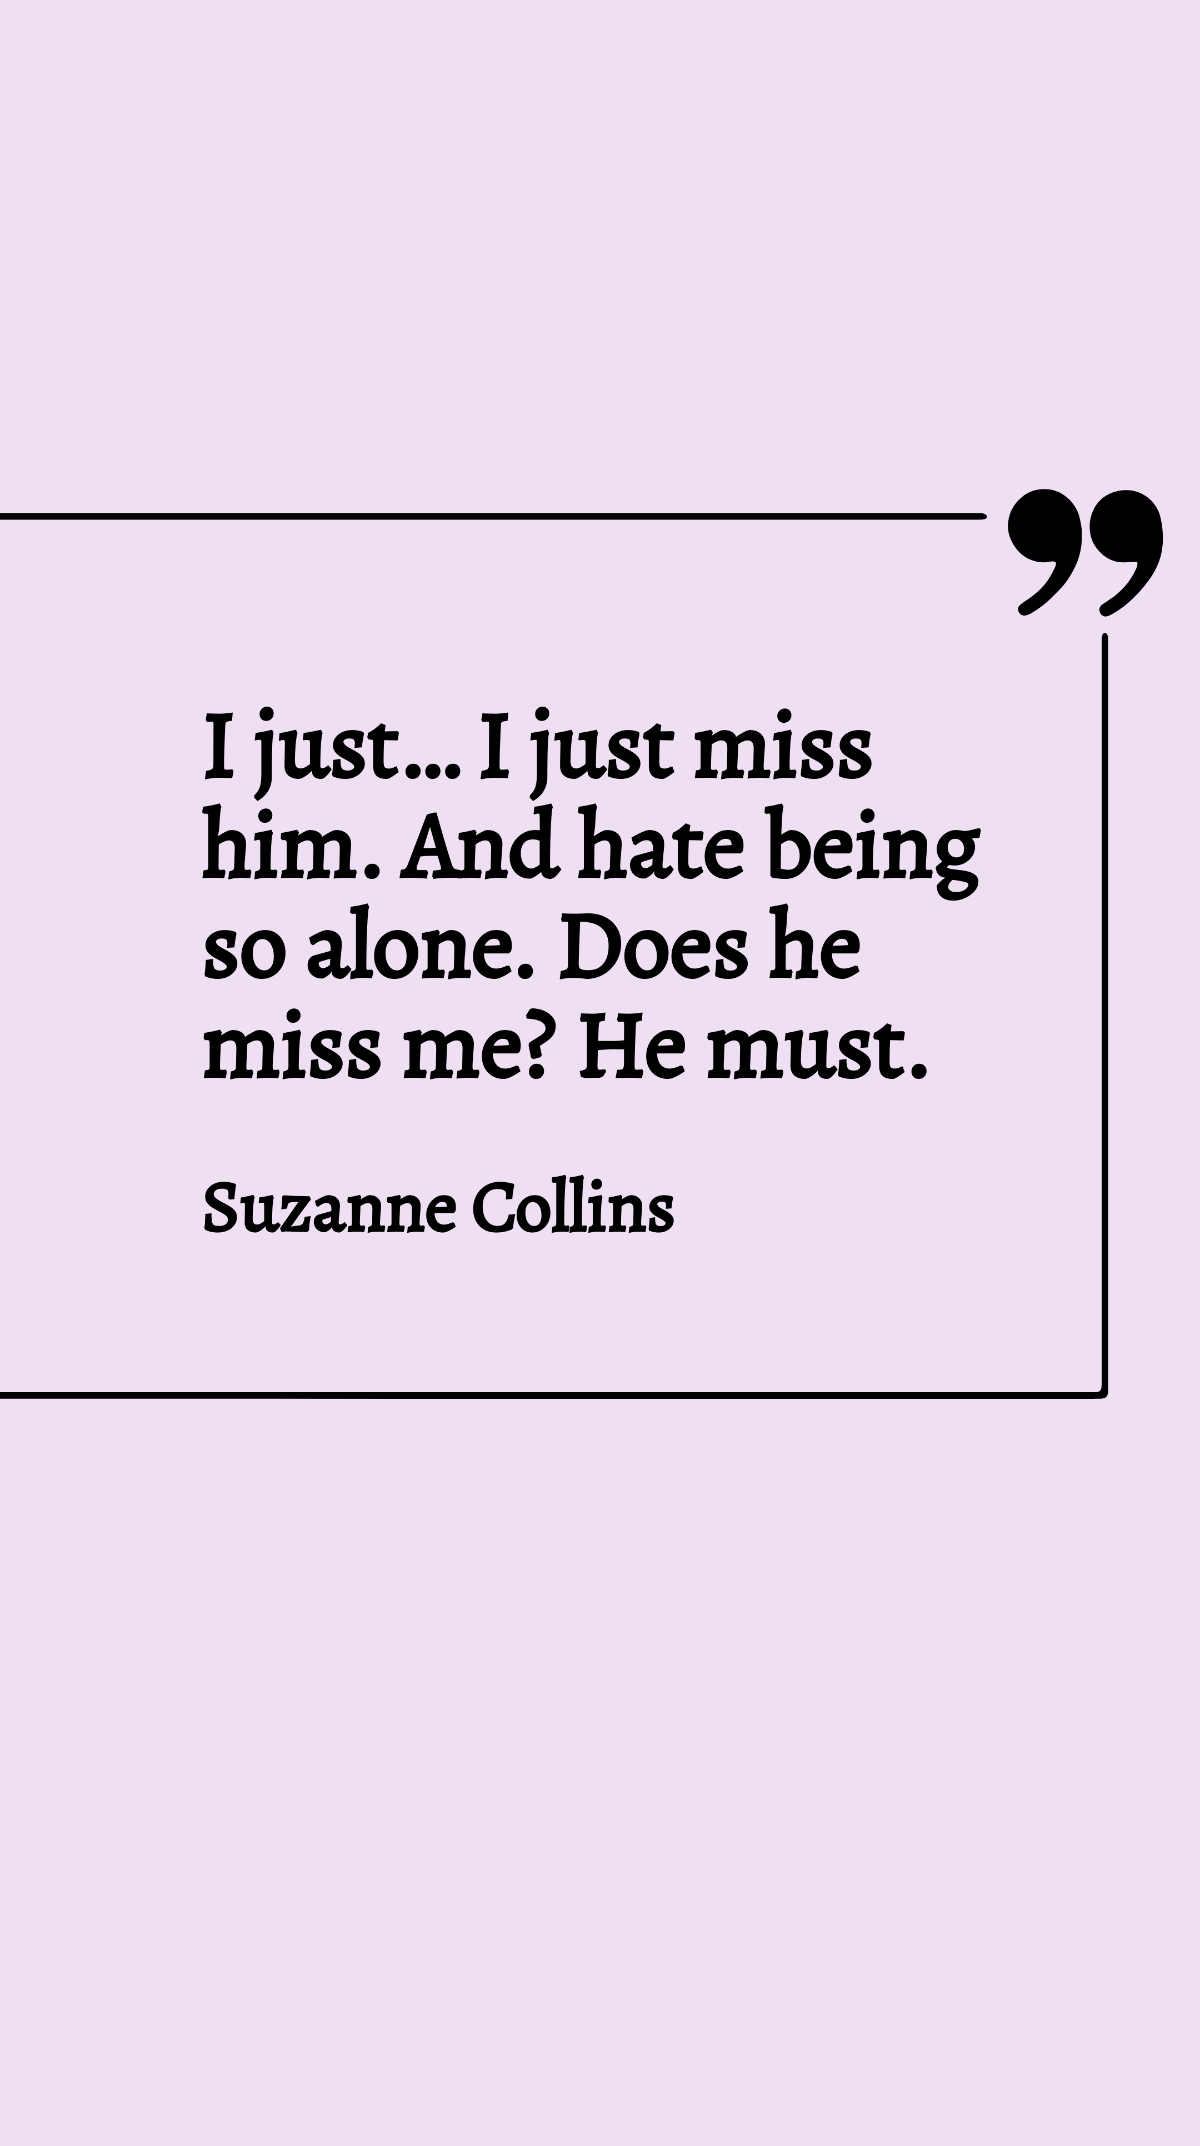 Suzanne Collins - I just… I just miss him. And hate being so alone. Does he miss me? He must.